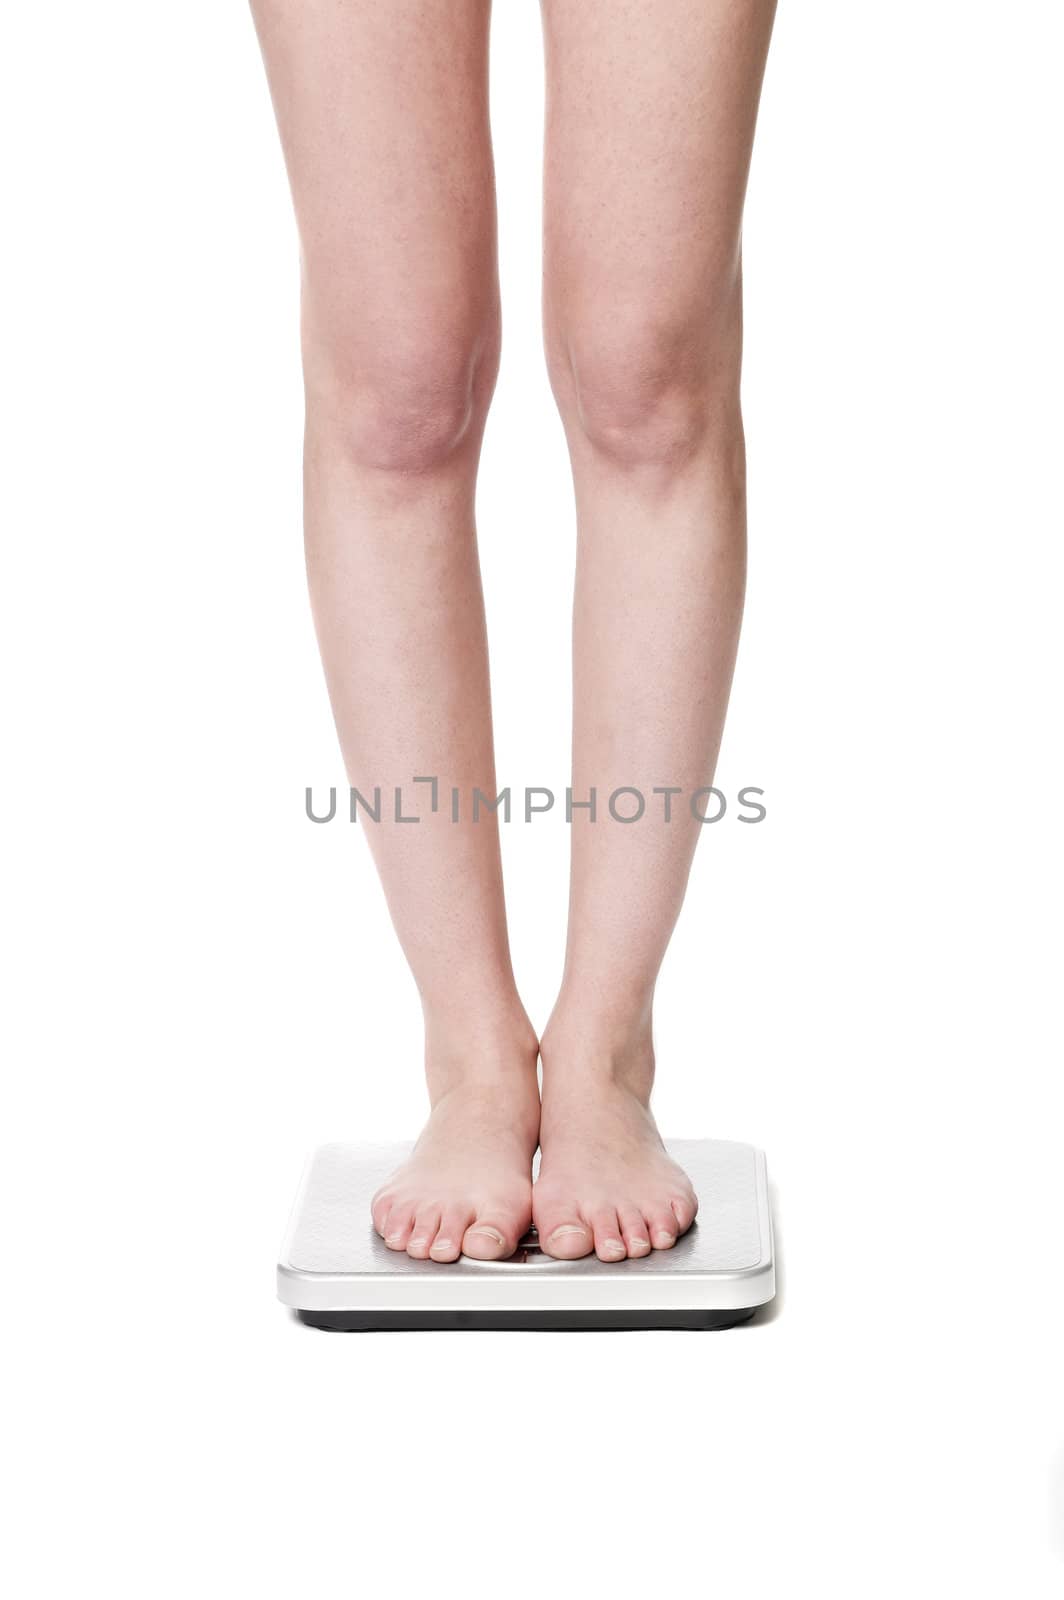 Standing on a weightscale